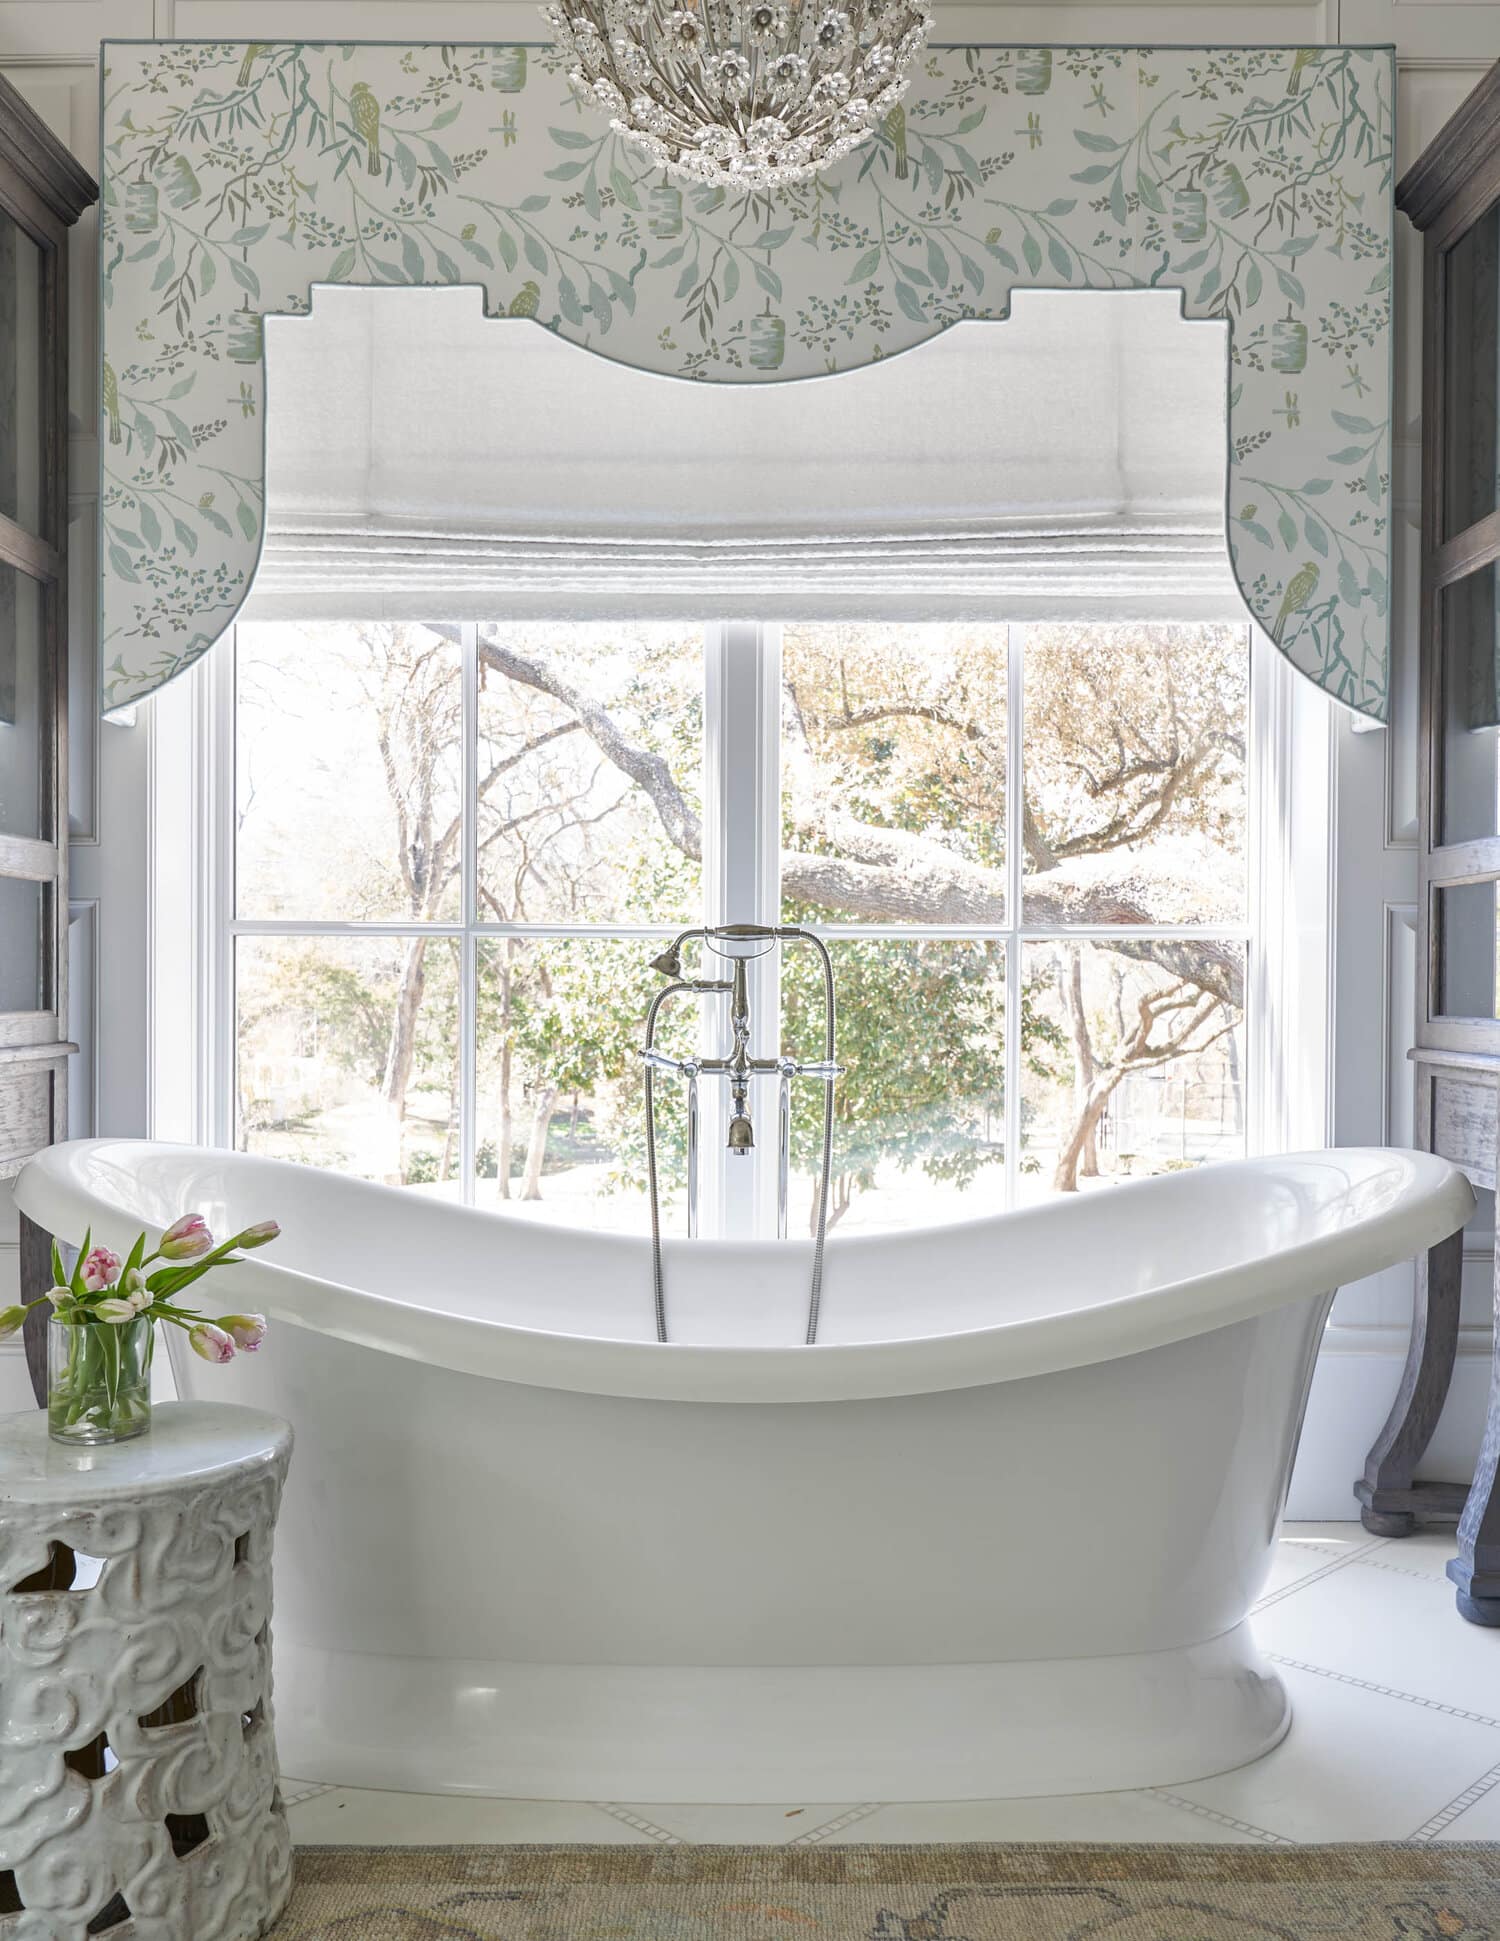 With a passion for aesthetics and an eye for detail, Jenkins Interiors creates stunning, spa-like bathrooms beautifully photographed by Nathan Schroder Photography. 